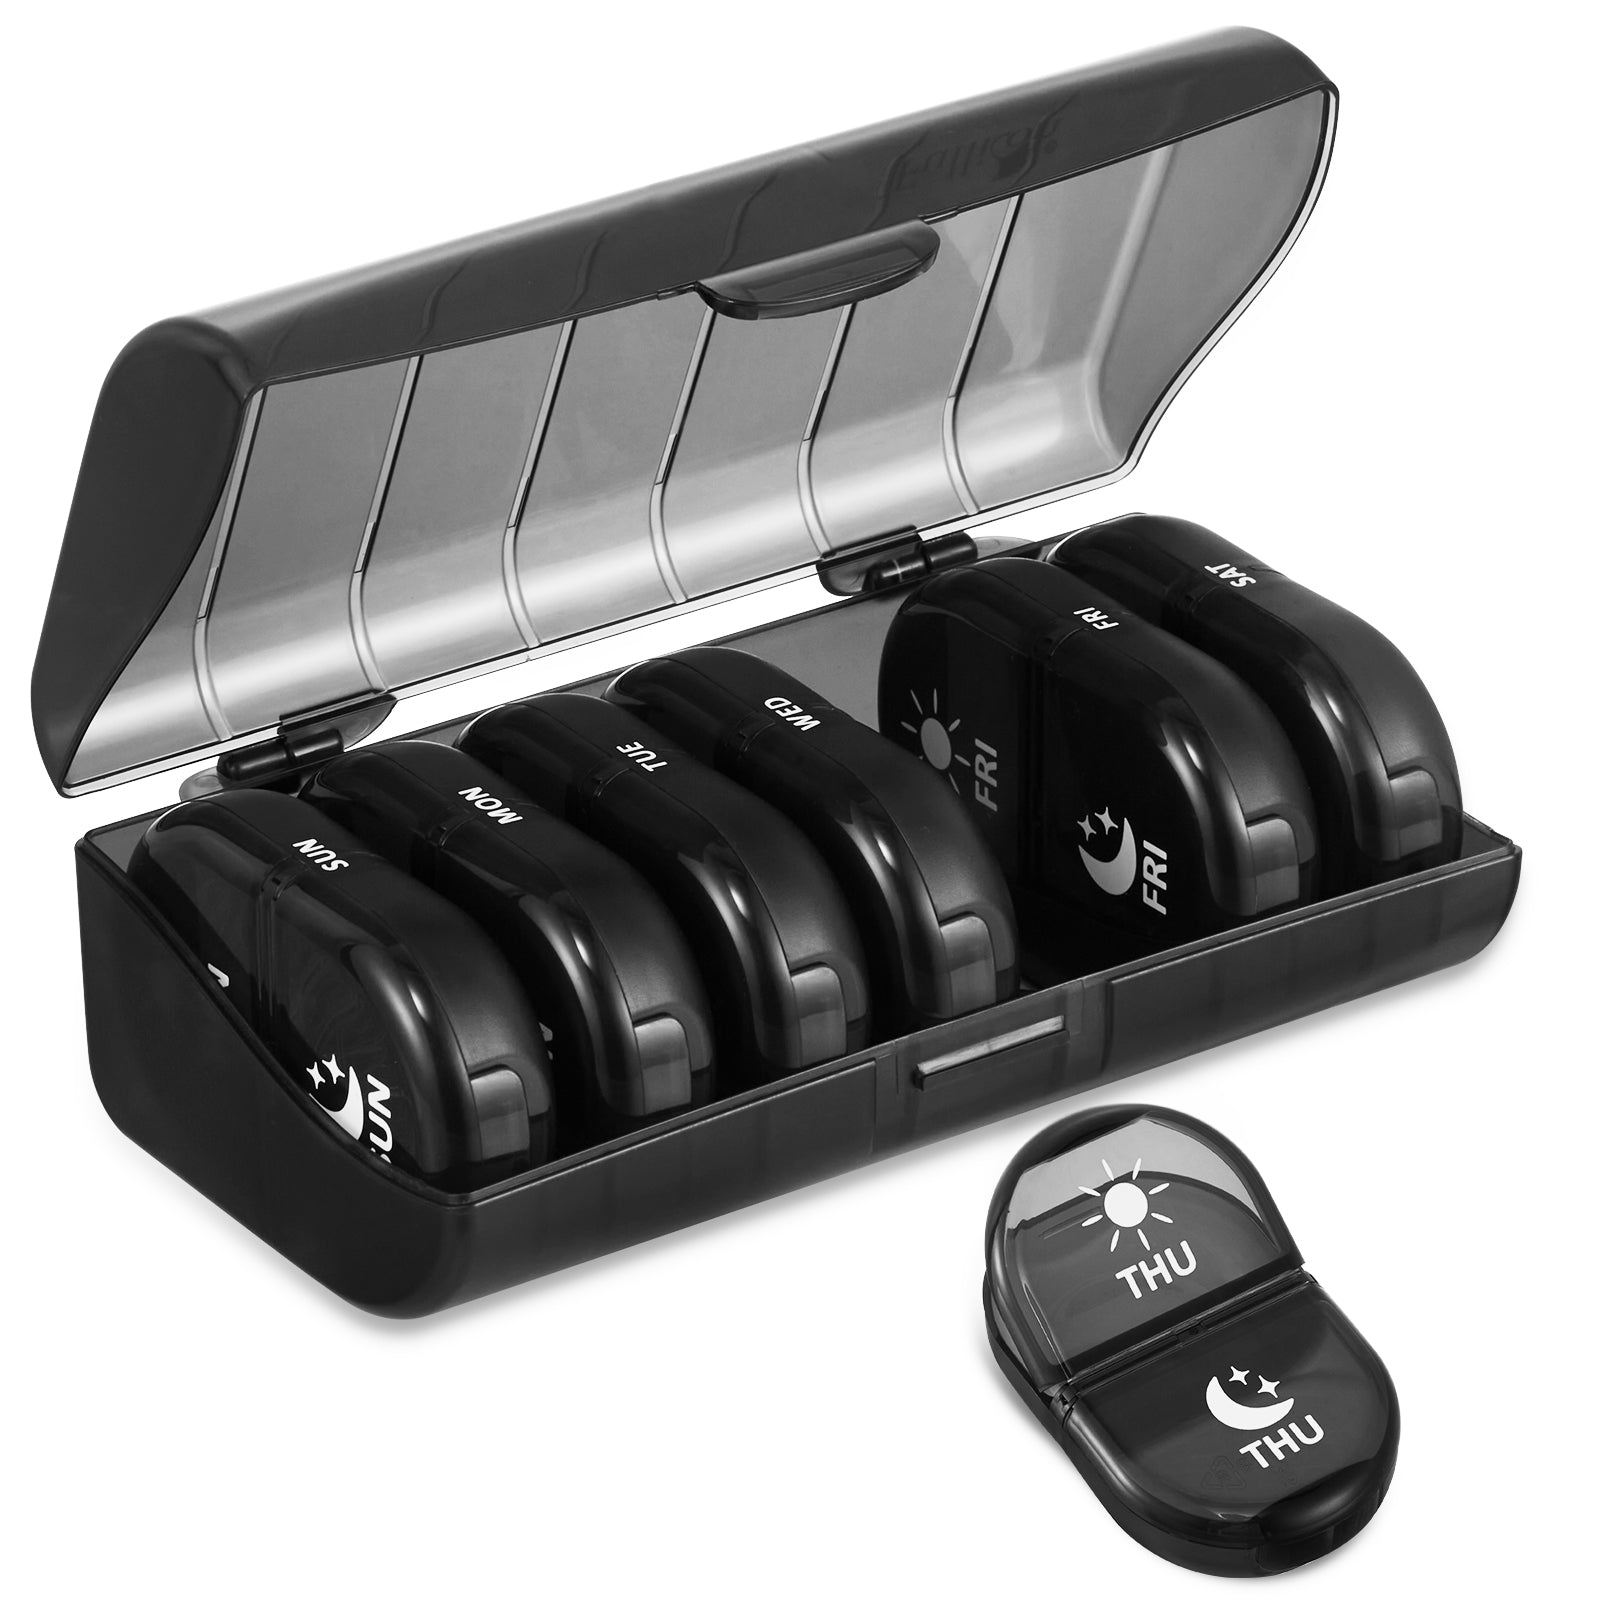 Fullicon Pill Organizer 2 Times a Day, Weekly Pill Box AM PM, Removable Medicine Organizer, Pill Cases Twice a Day